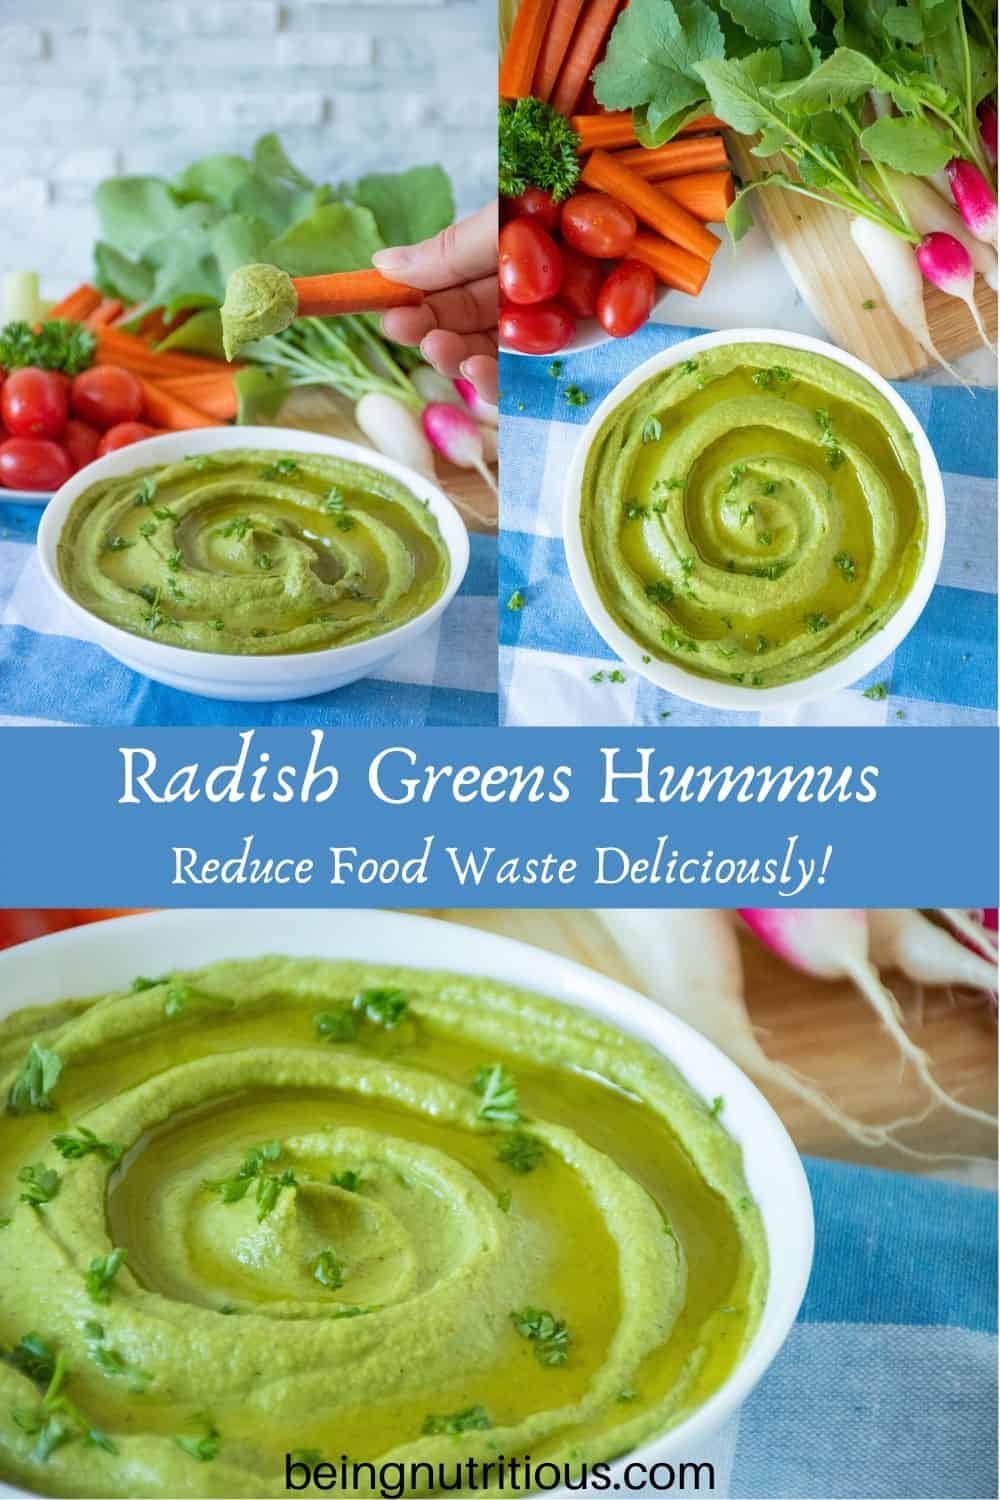 Compilation of 3 images of radish greens hummus in a white bowl, with a variety of vegetables for dipping in the background.